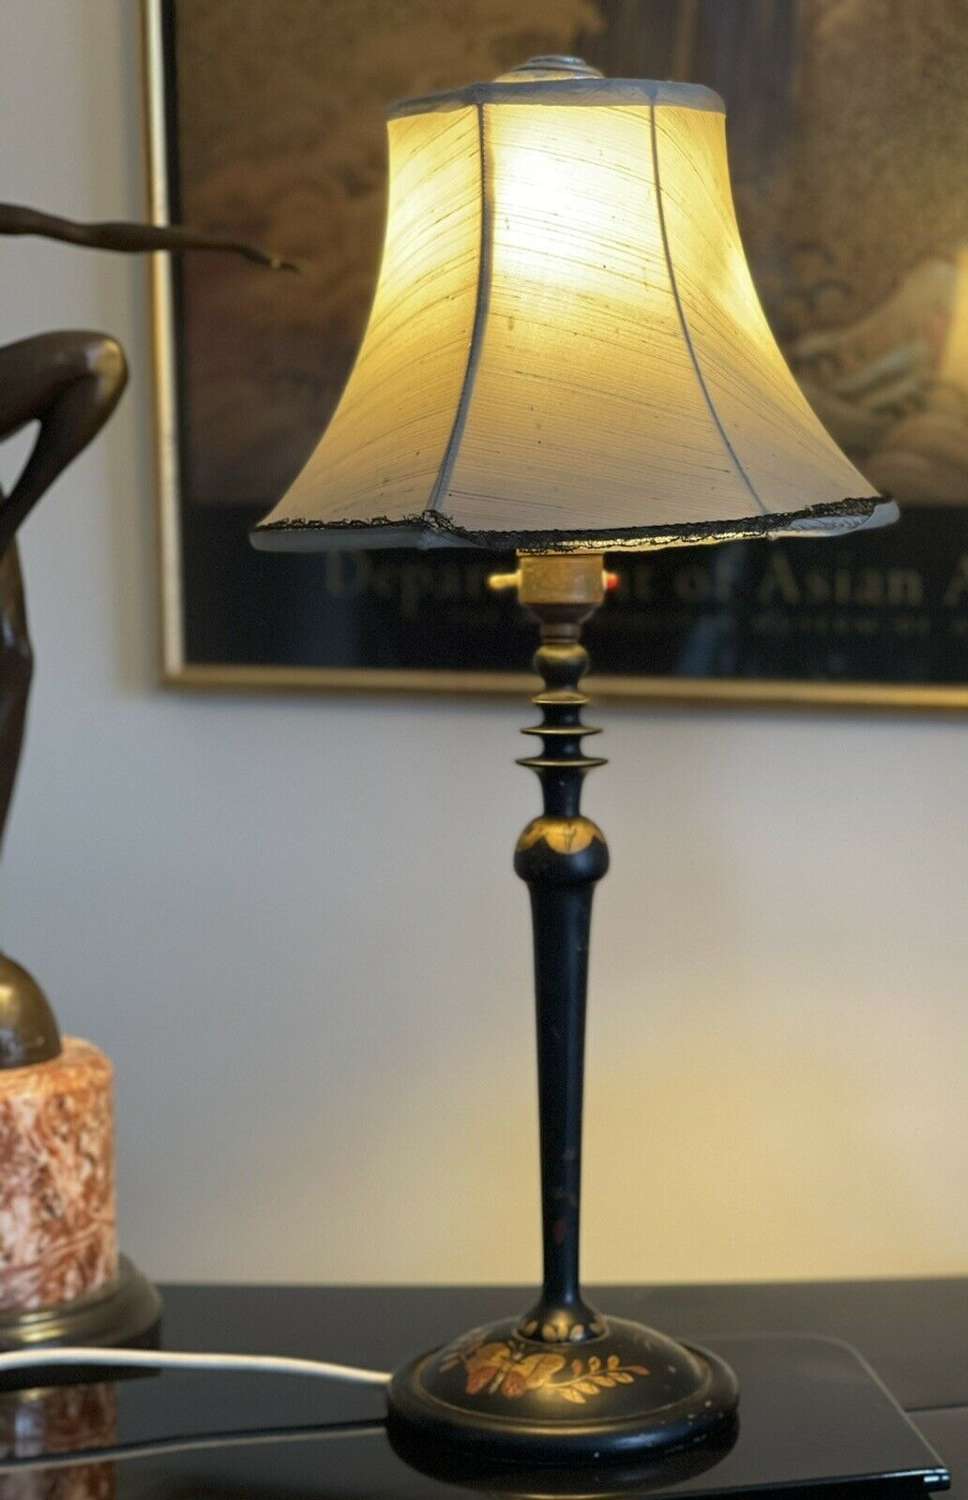 Antique Chinoiserie table lamp circa 1920.